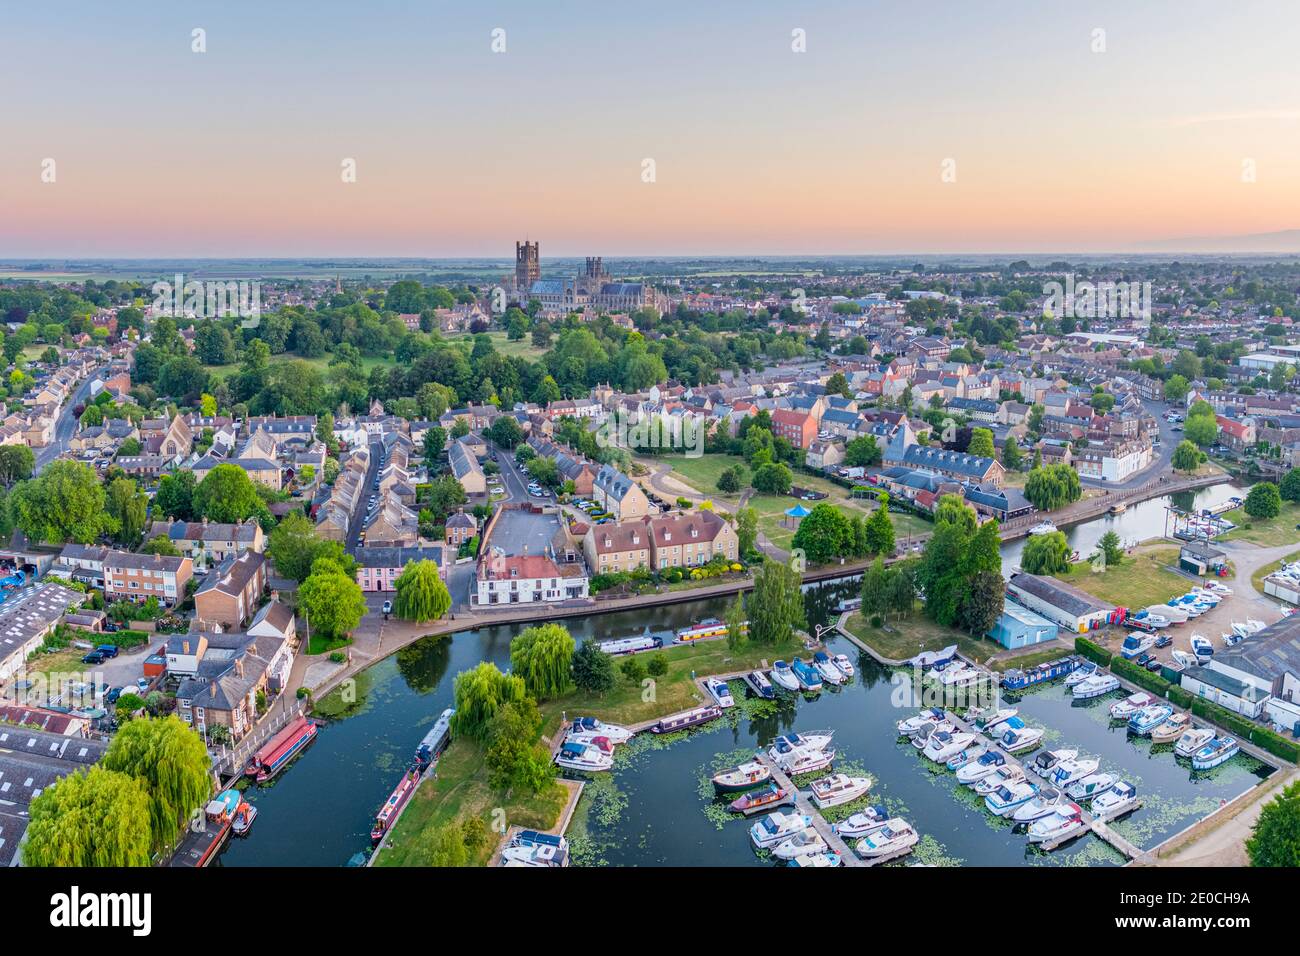 Drone view of Ely Cathedral with Ely Marina and Great Ouse River in foreground, Ely, Cambridgeshire, England, United Kingdom, Europe Stock Photo